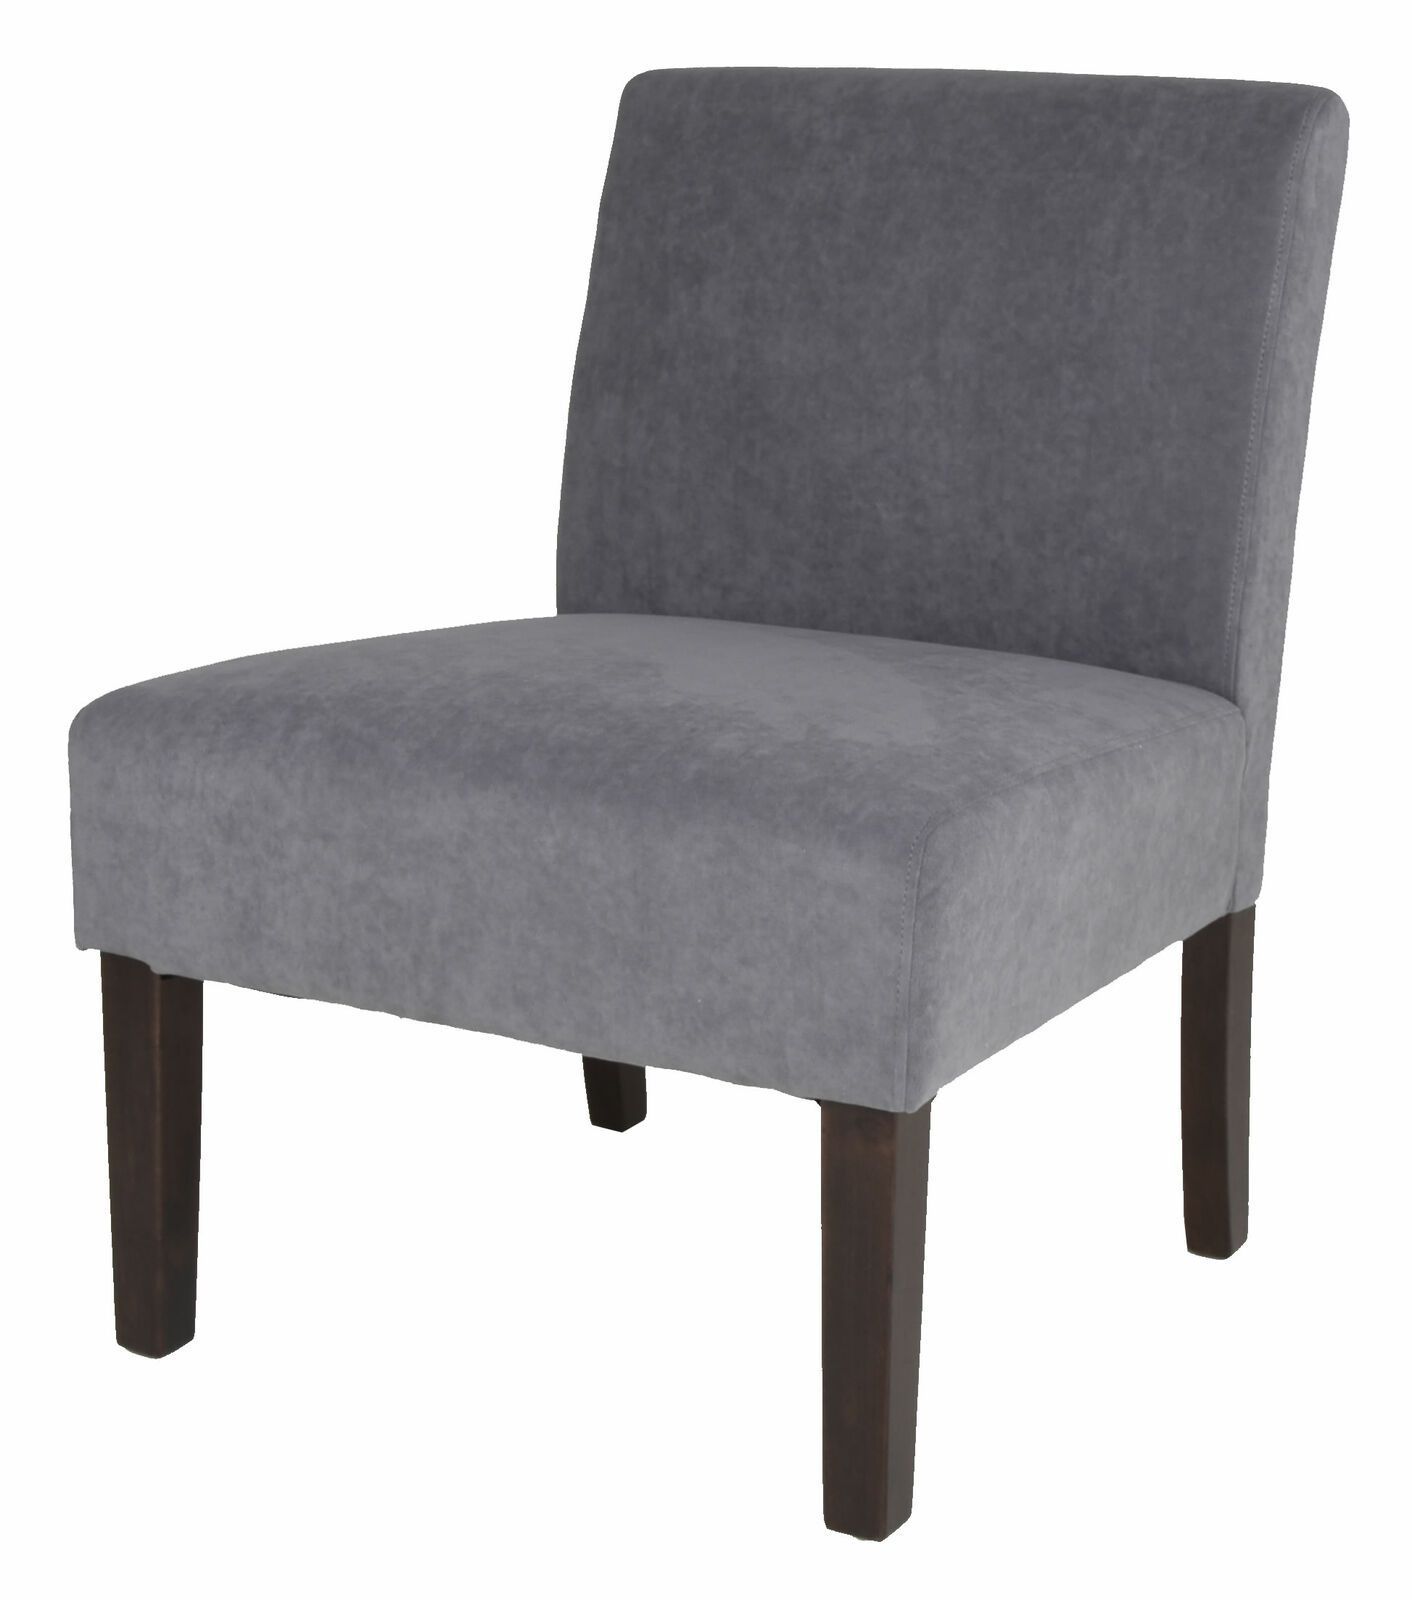 Zenvida Modern Armless Accent Slipper Chair Solid Hardwood Pertaining To Harland Modern Armless Slipper Chairs (View 2 of 15)